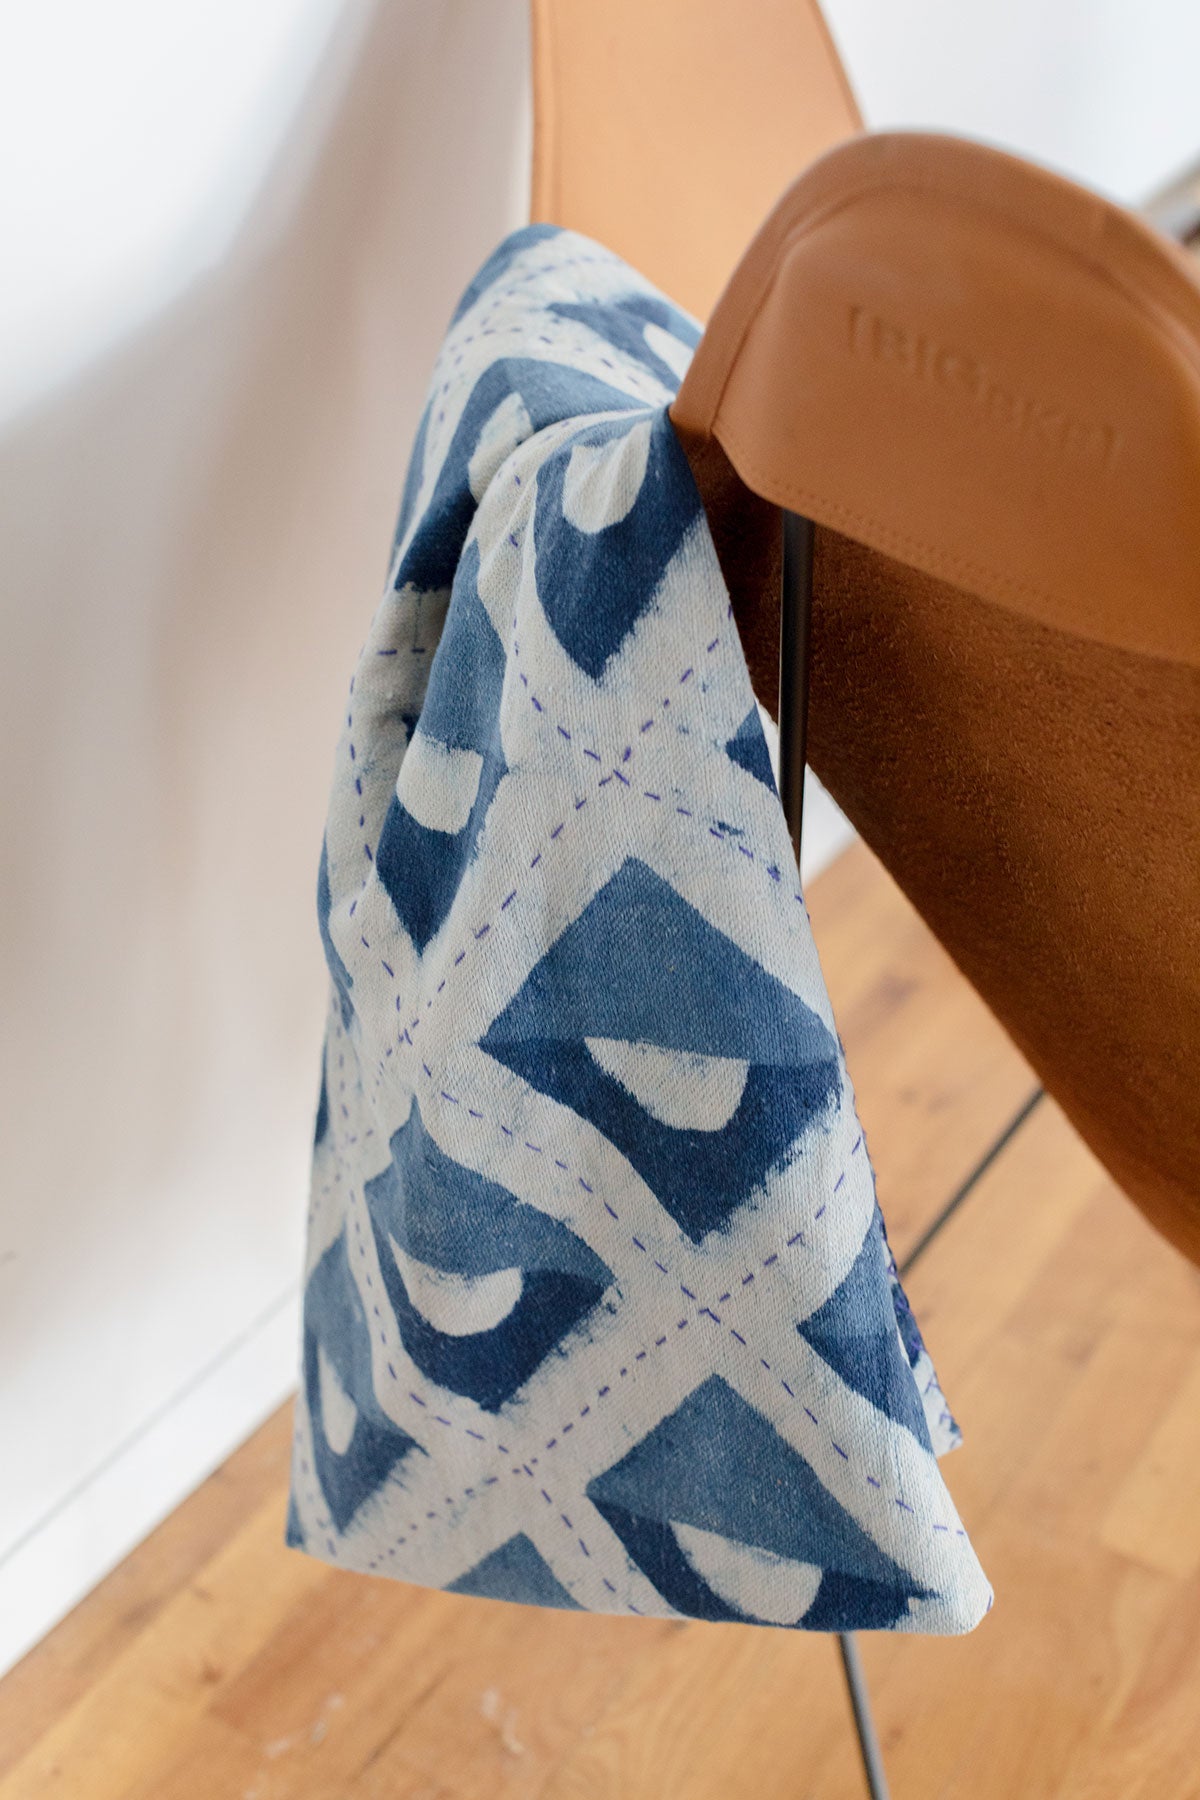 Blue and white hand block printed indigo throw featuring geometric shapes. Lightweight and easy to take with you to the beach or park, or to cuddle up with at home. 